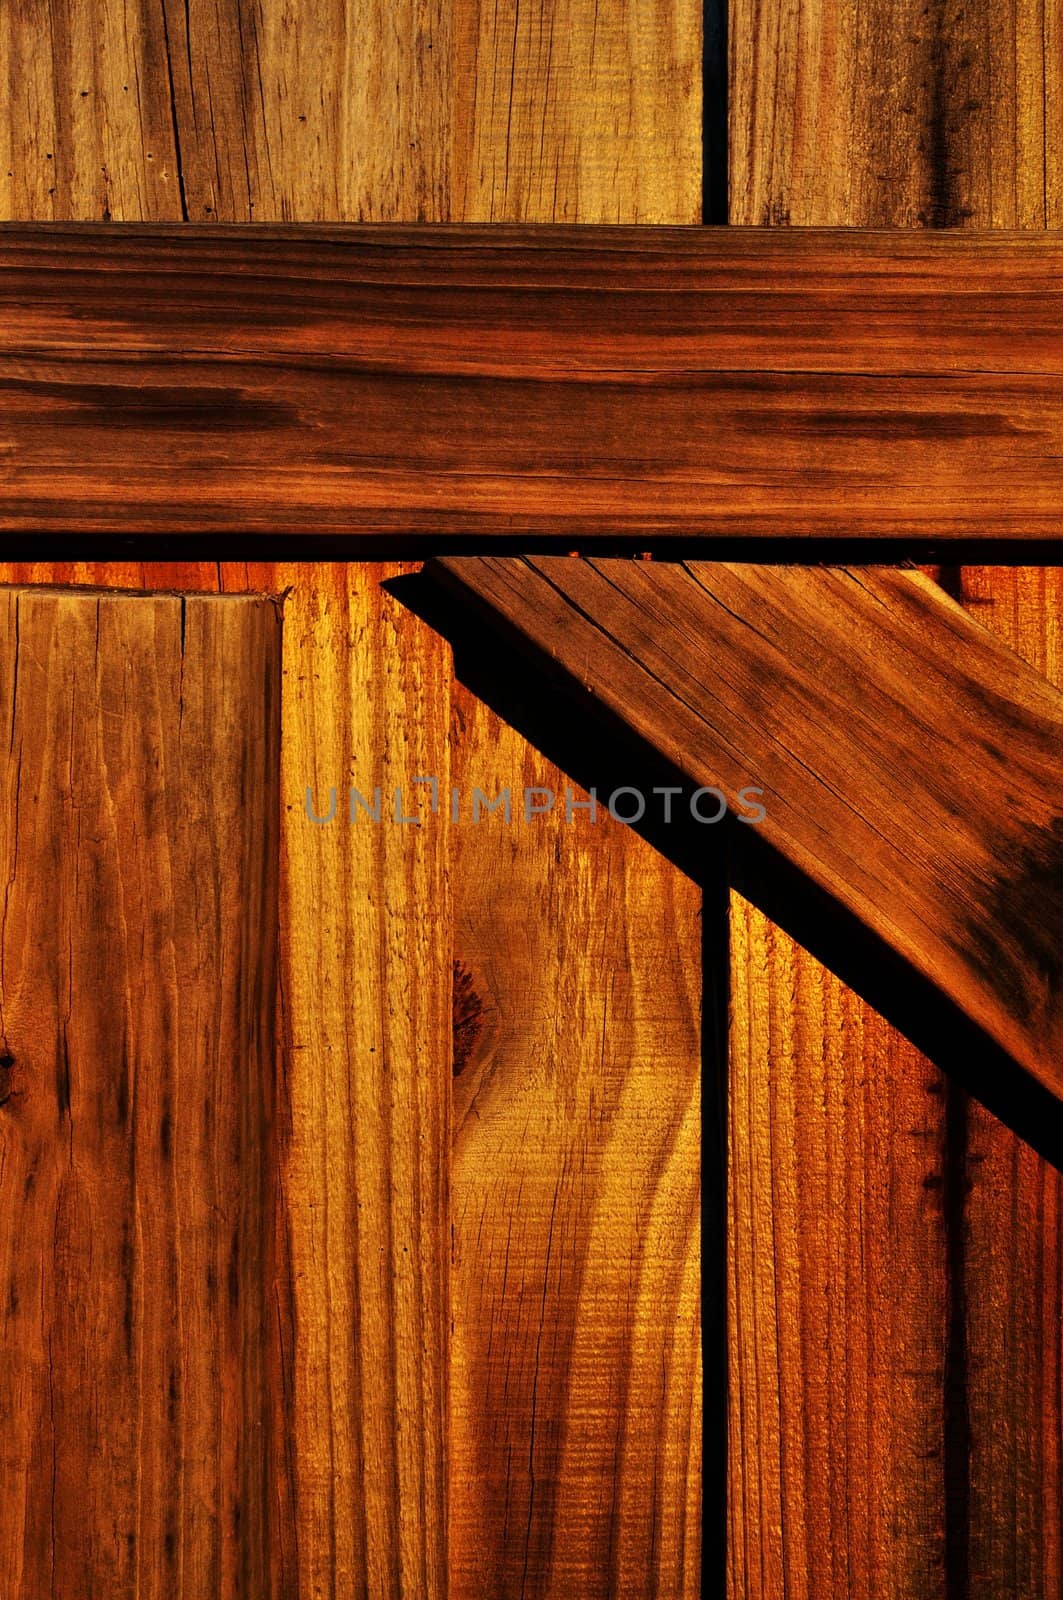 Close detail of a backyard wooden fence boards.